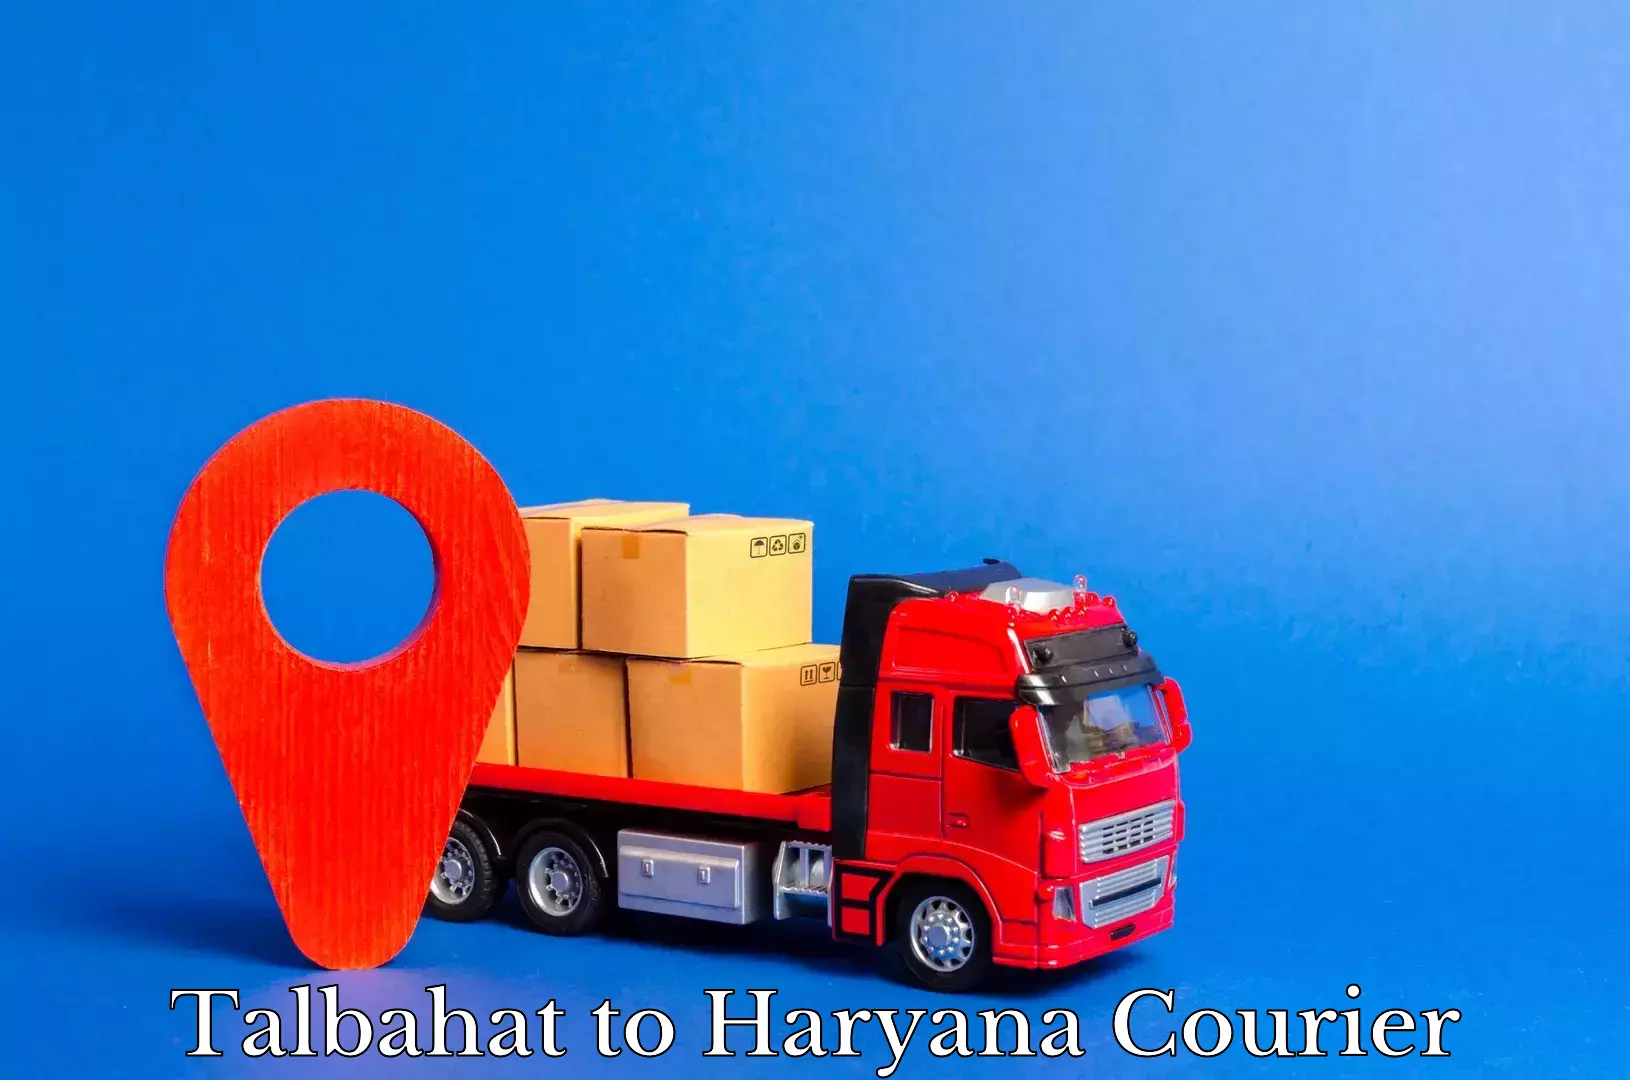 Courier service comparison Talbahat to Haryana